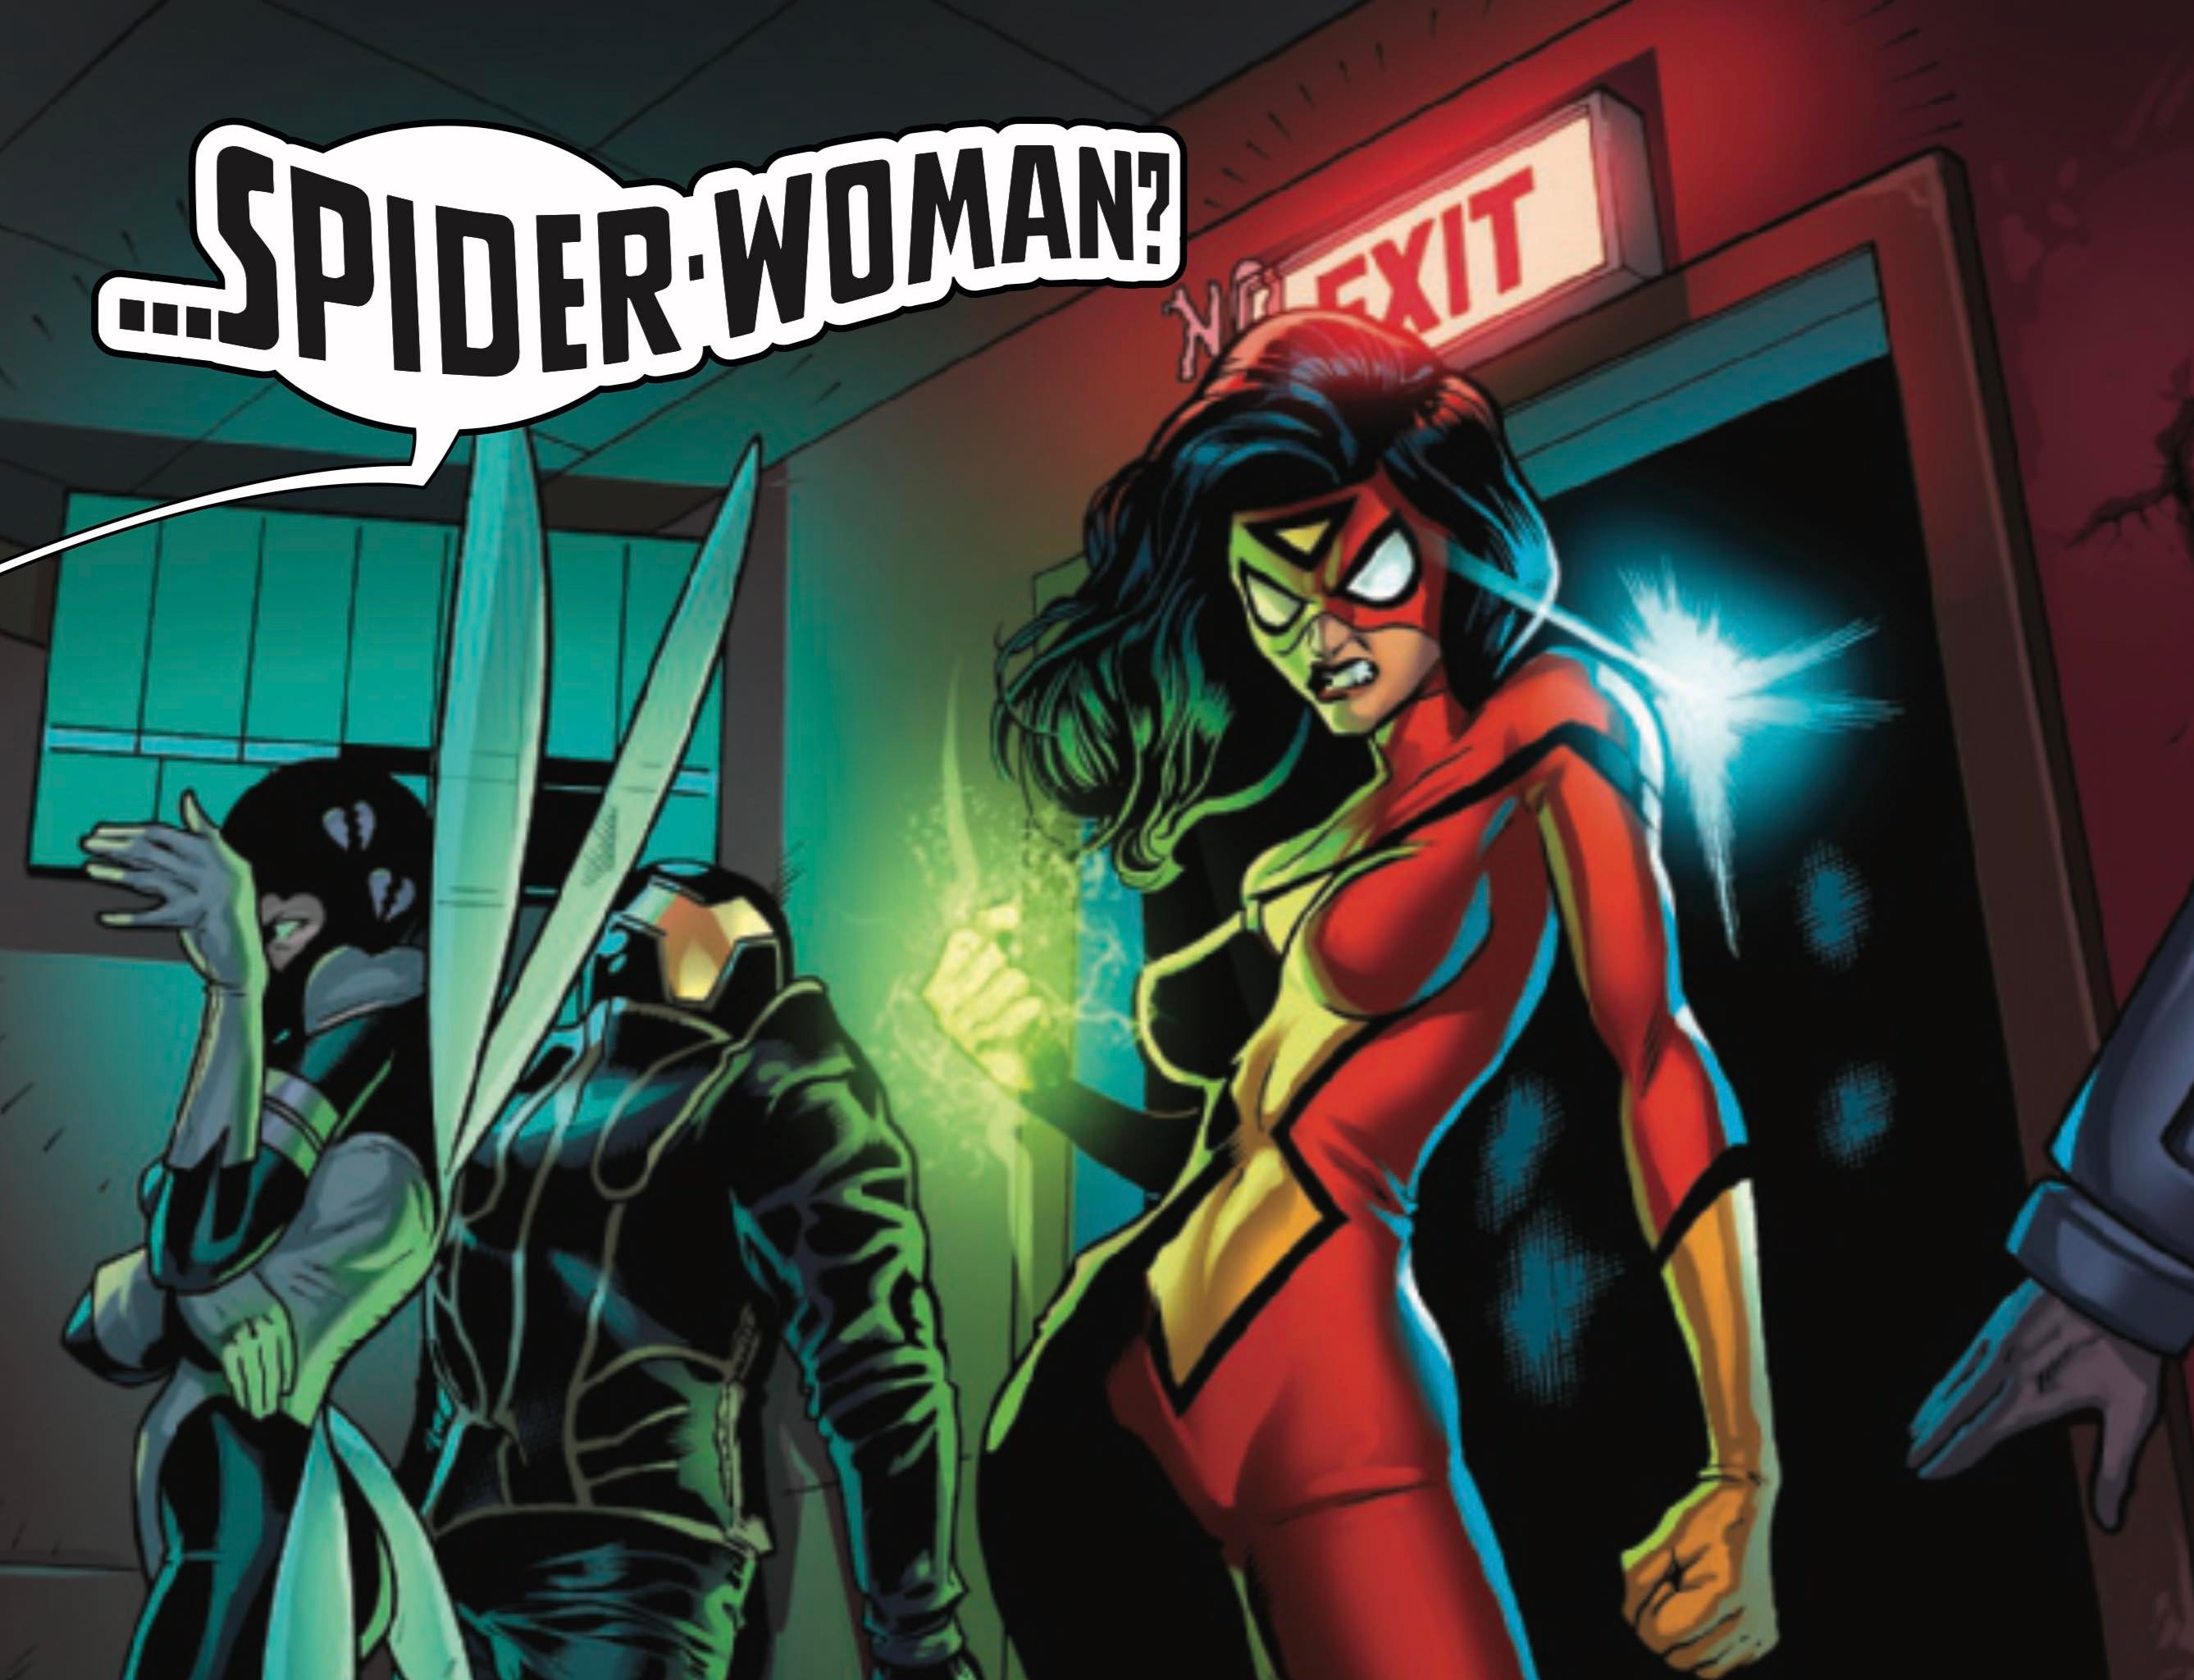 Spider-Woman is mad